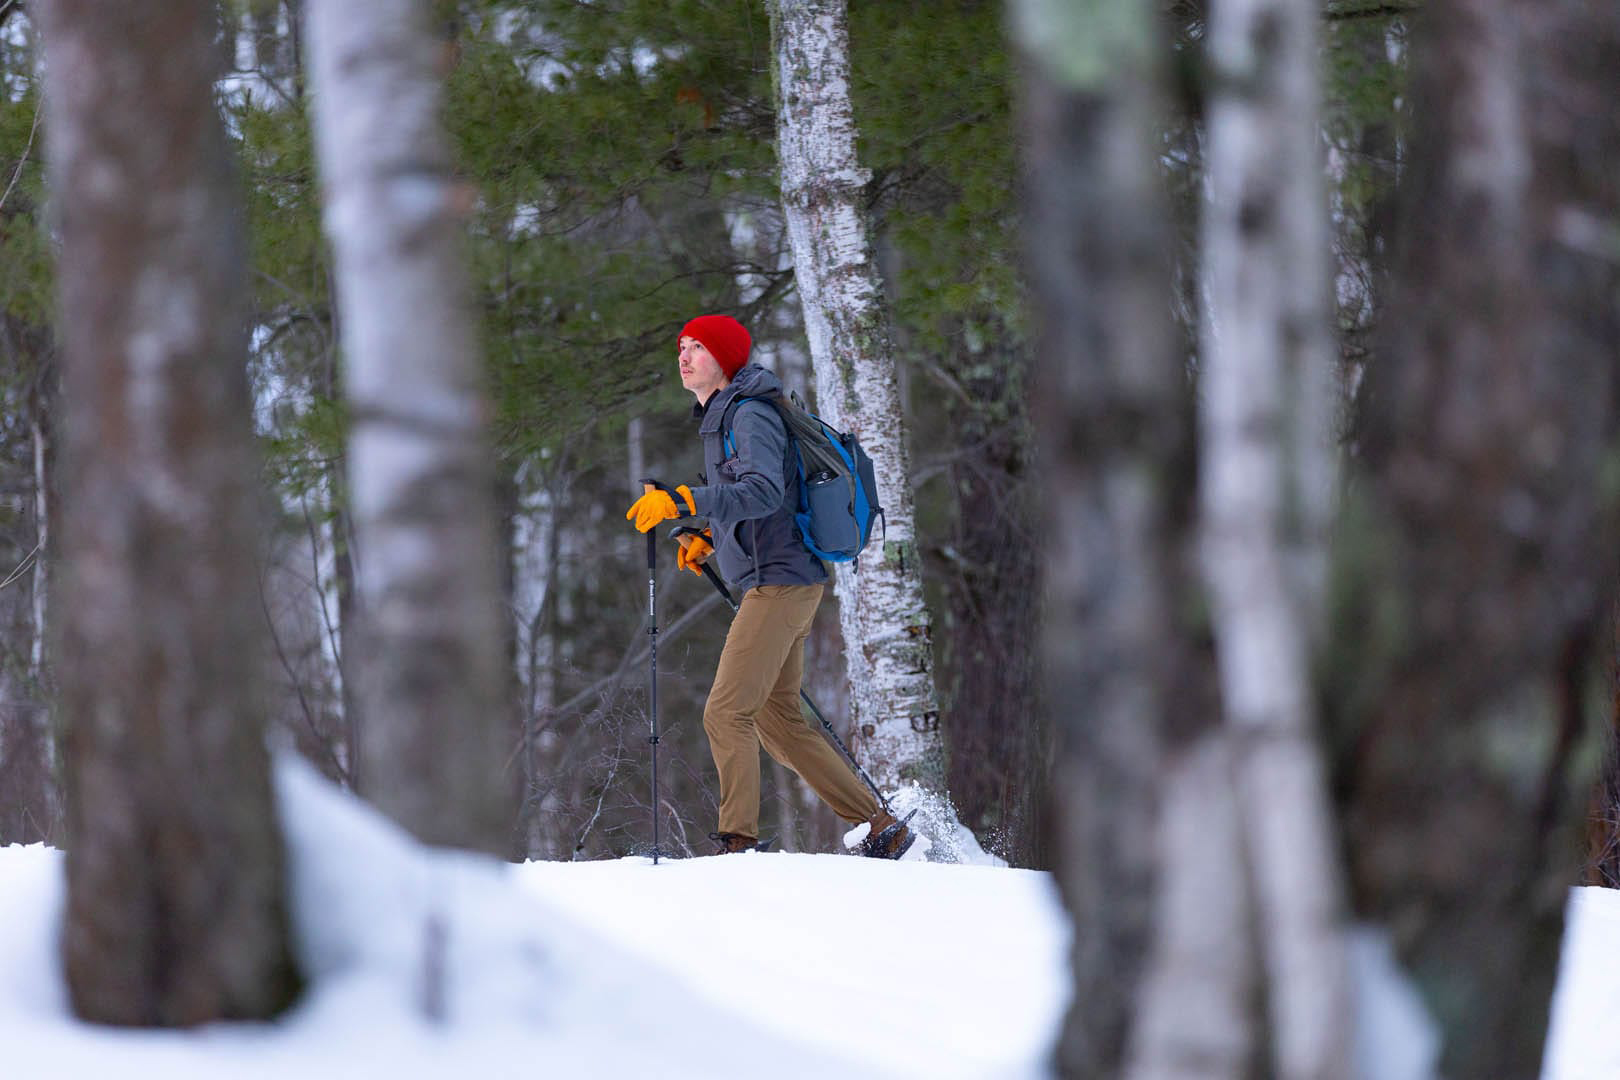 Superior makes winter outdoors in Wisconsin really fun. Really affordable. Really wild.